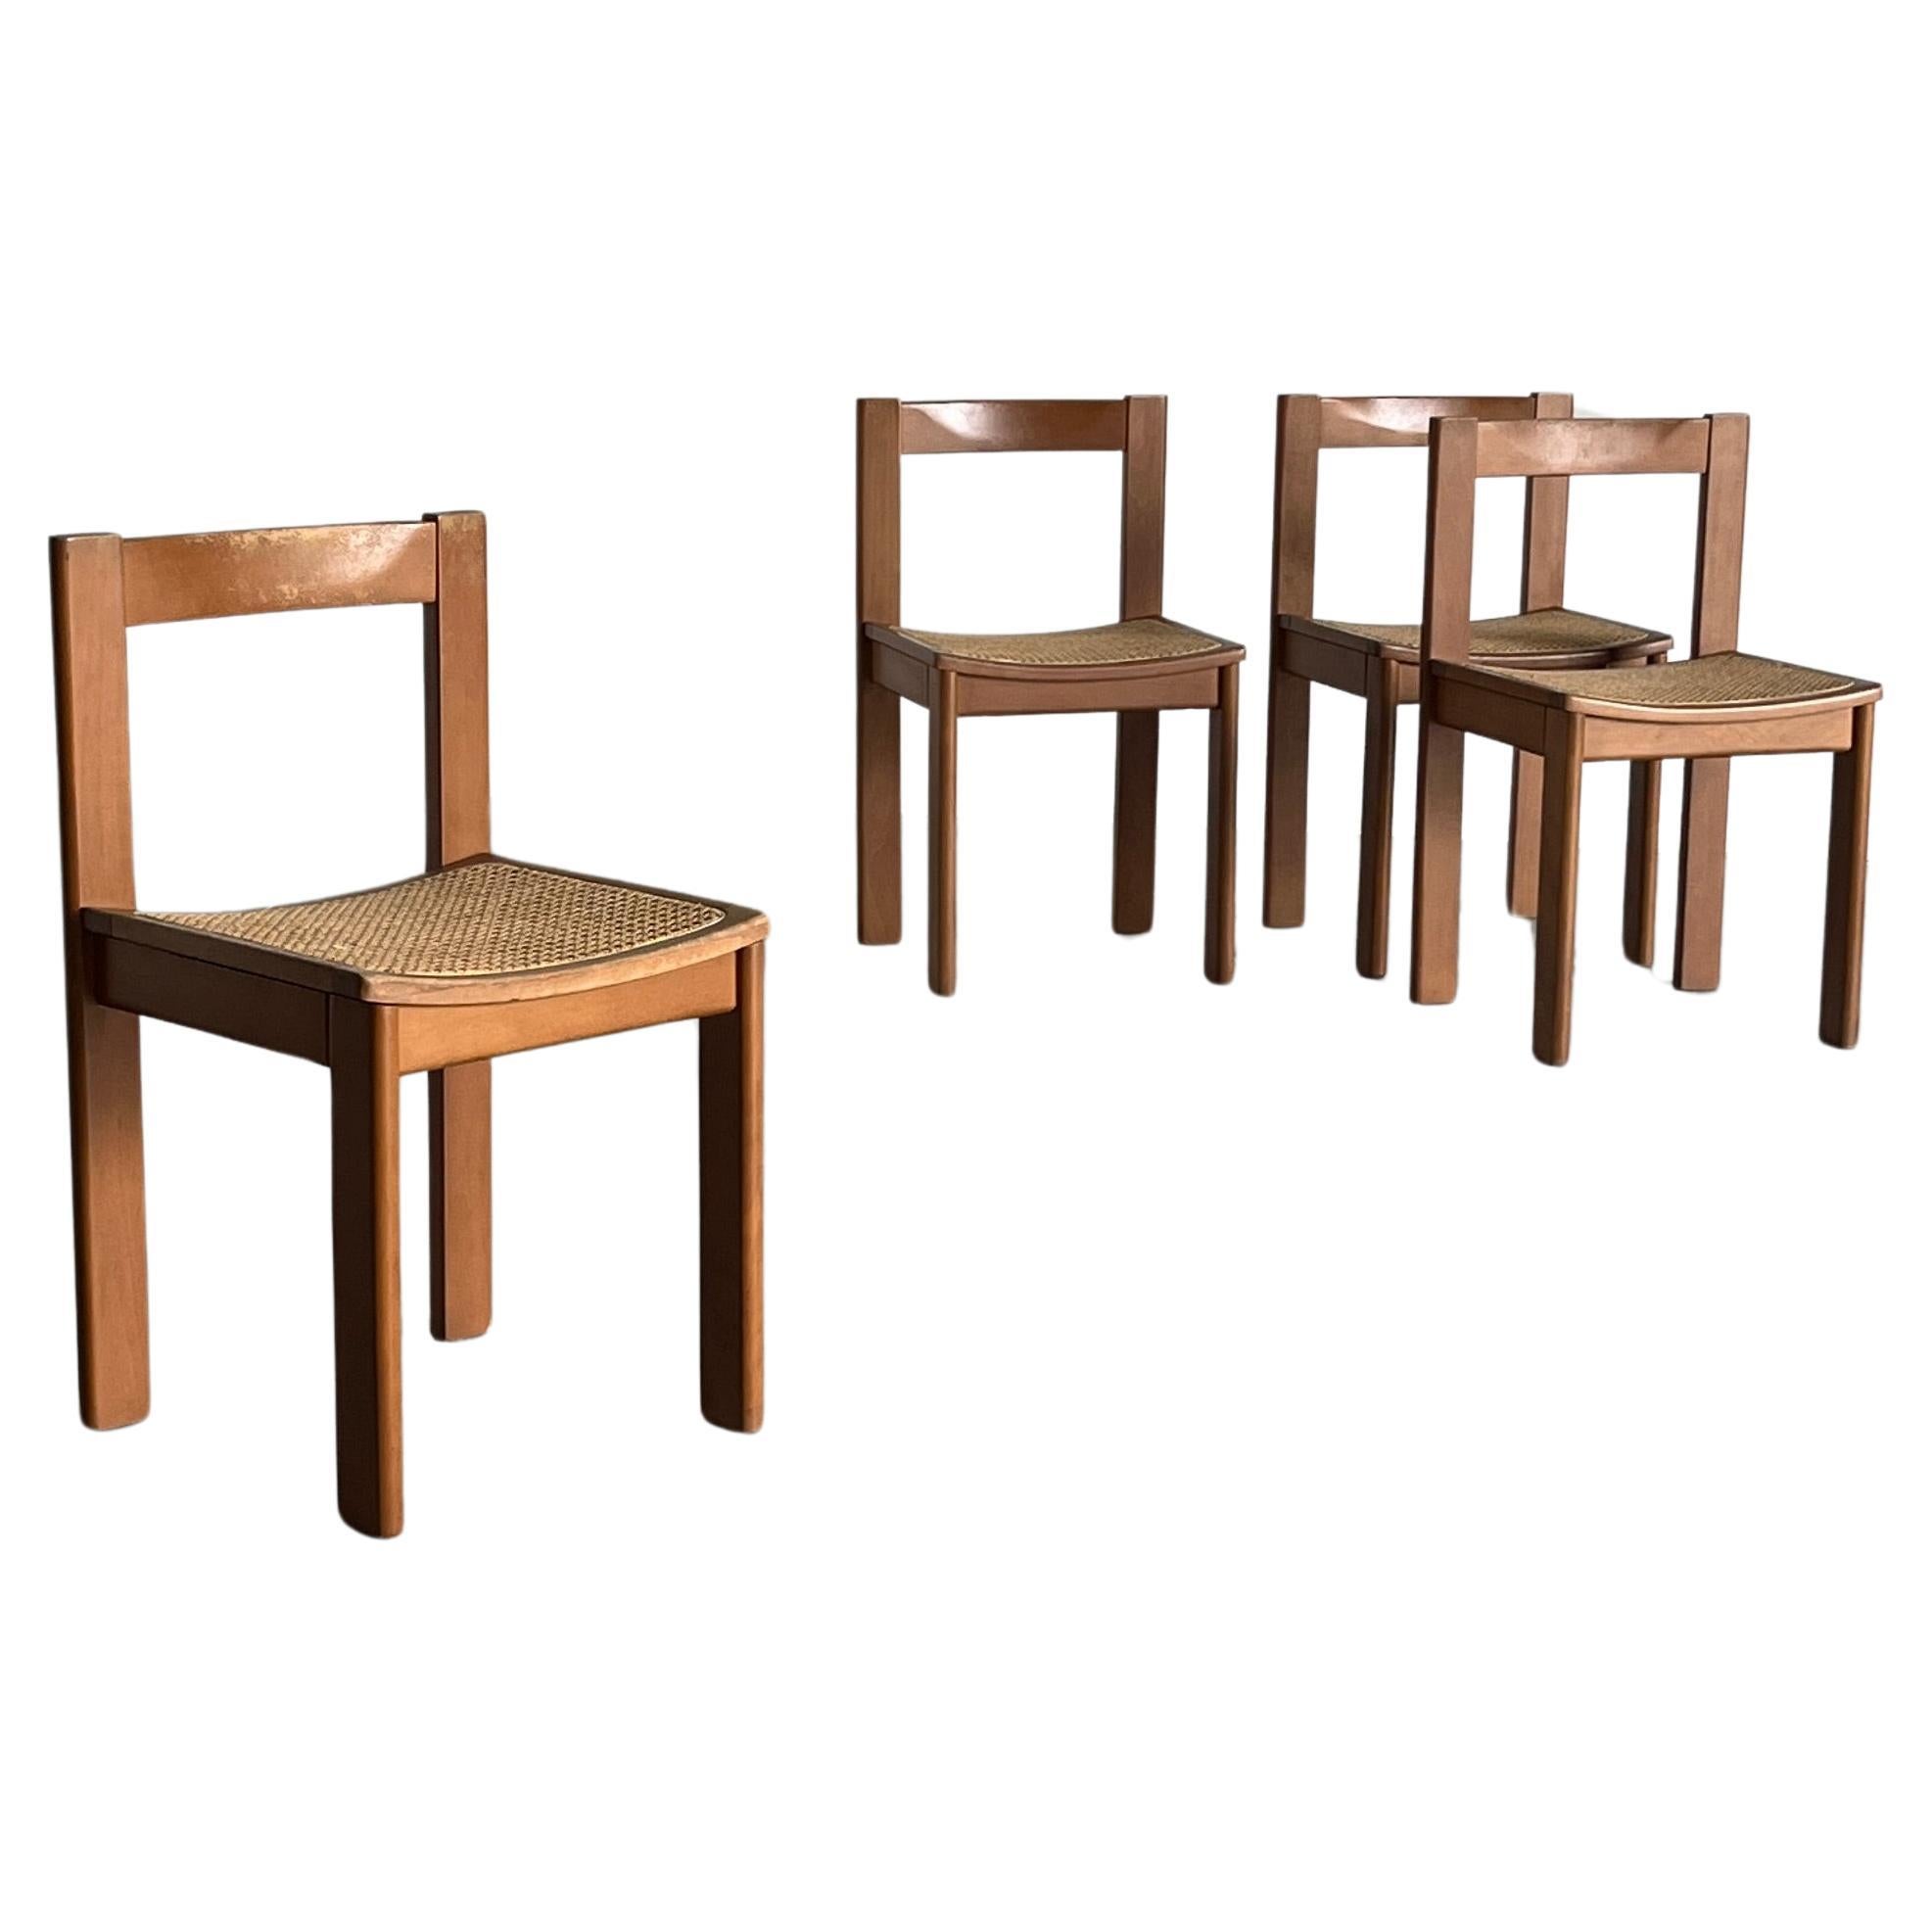 Set of 4 Vintage Mid-Century Modern Constructivist Wooden Dining Chairs, 1960s For Sale